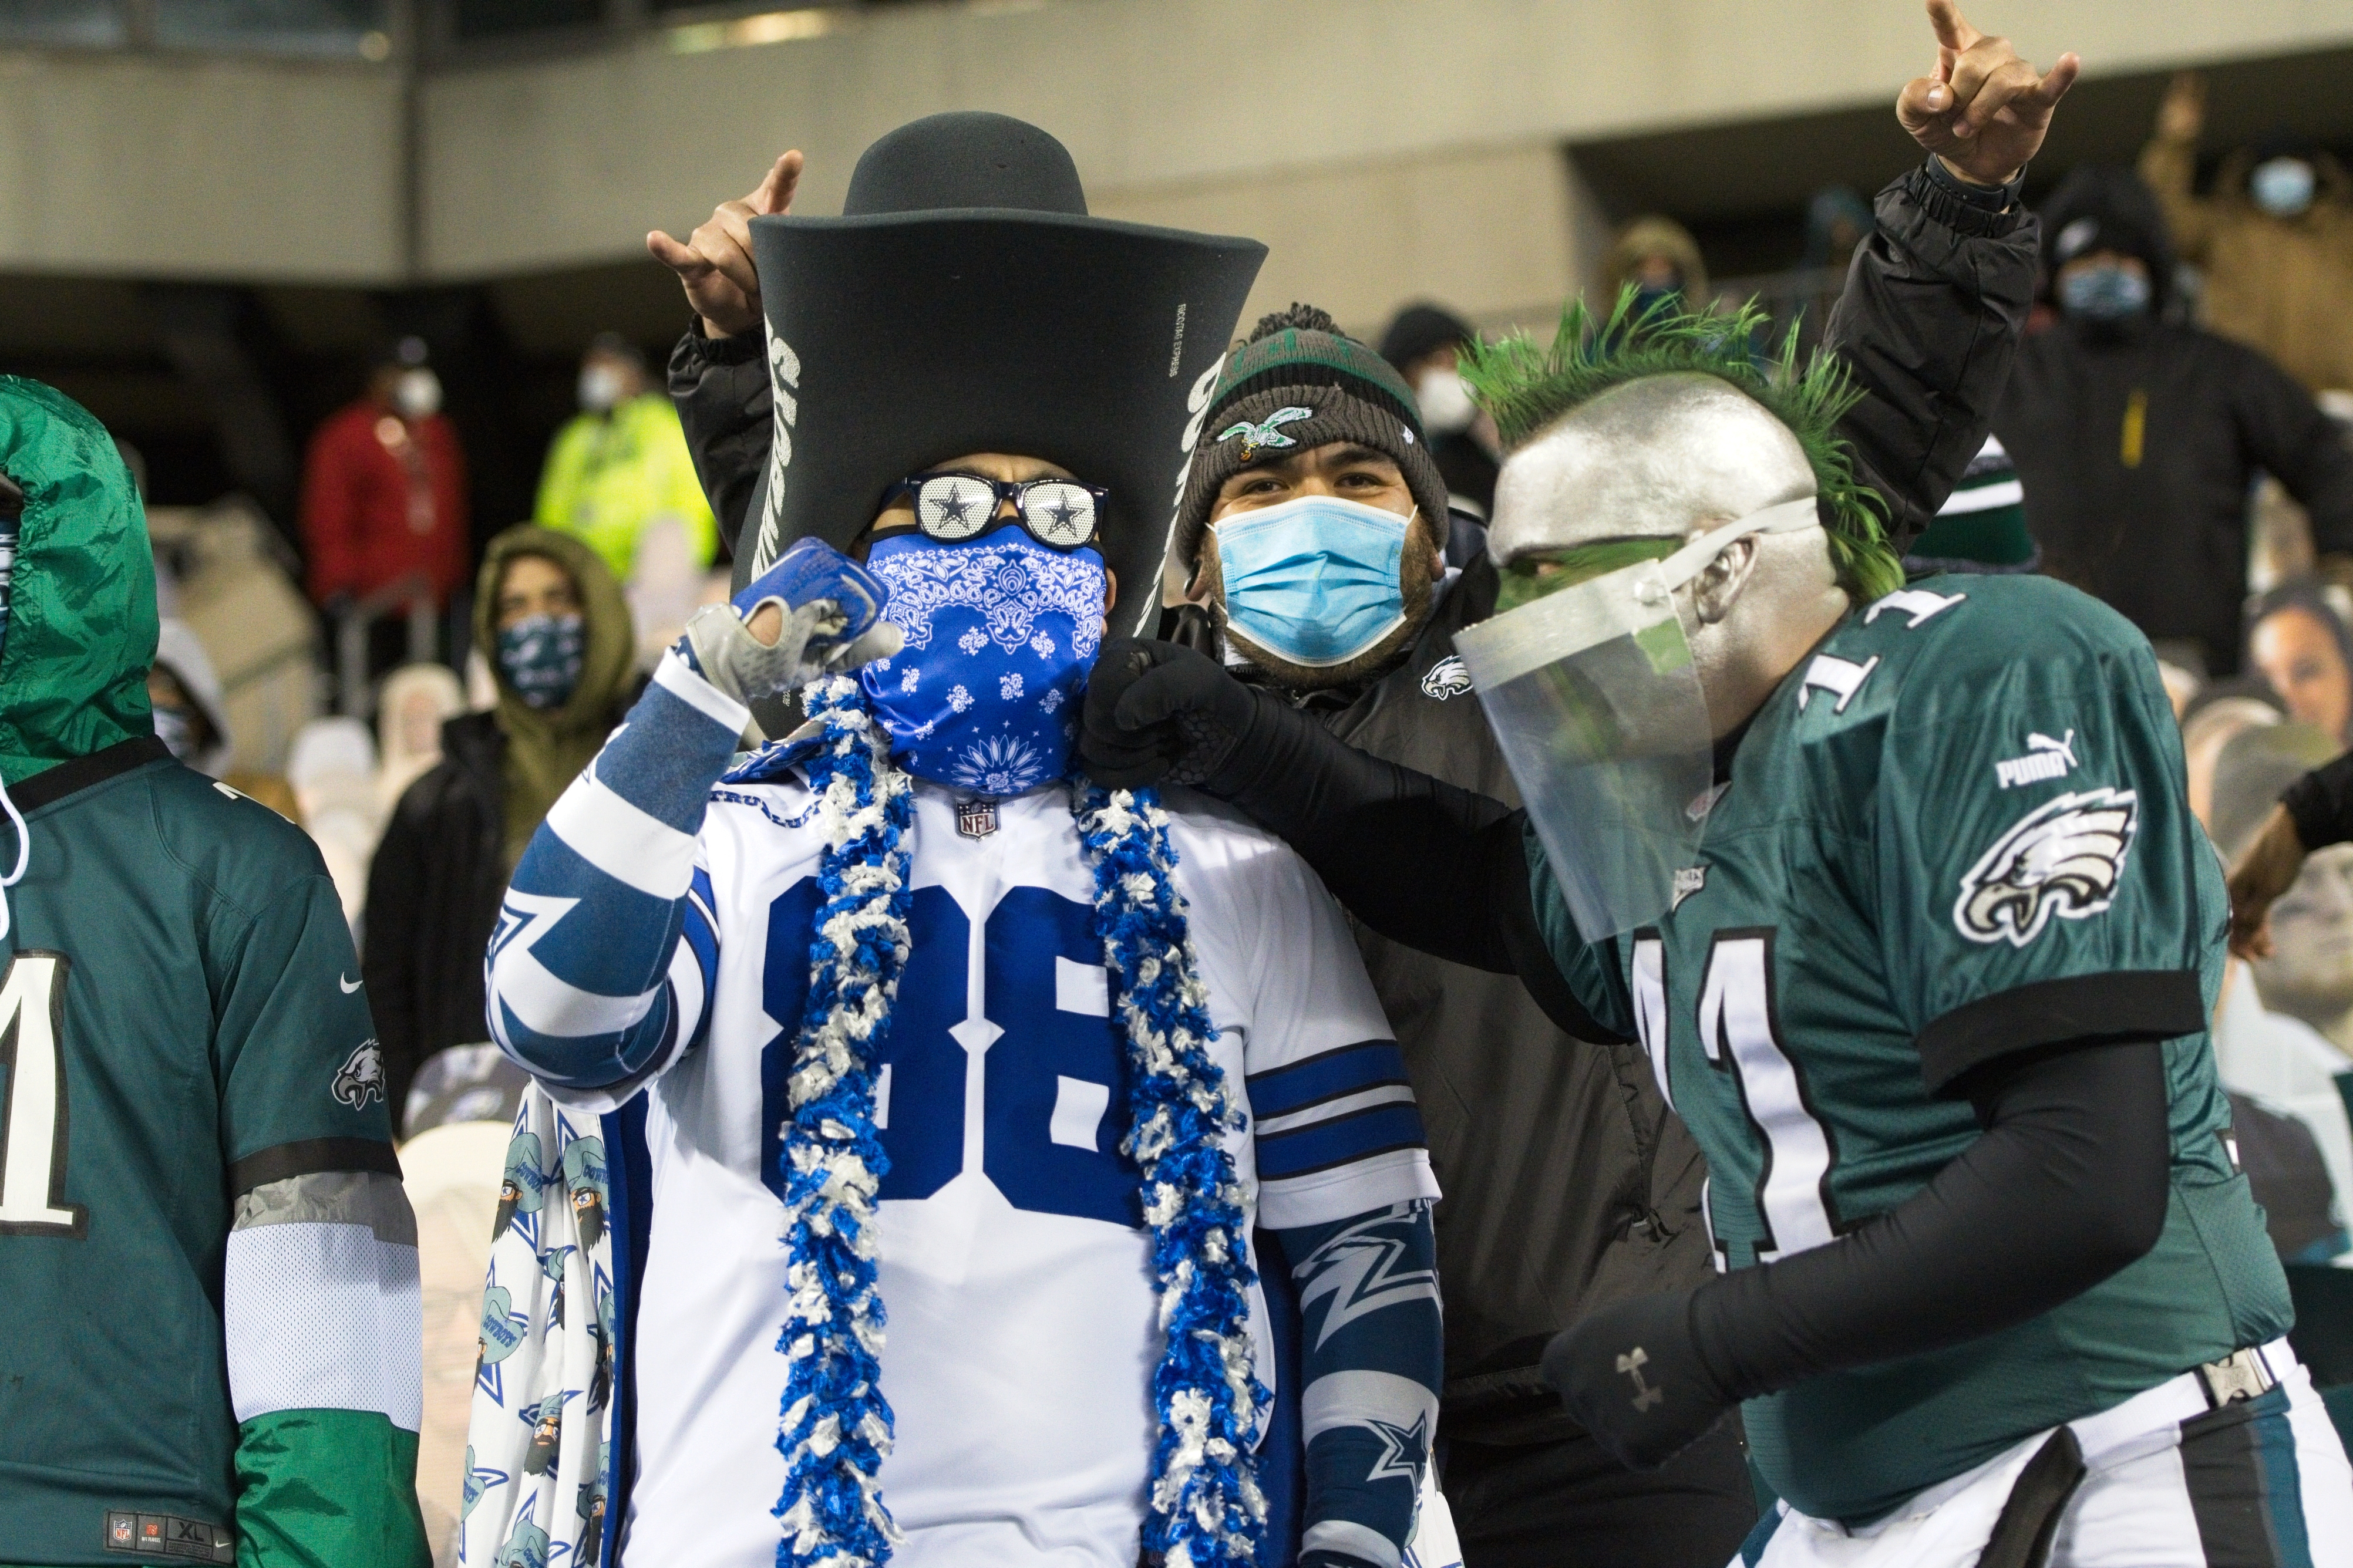 Eagles and Cowboys fans celebrate during a game